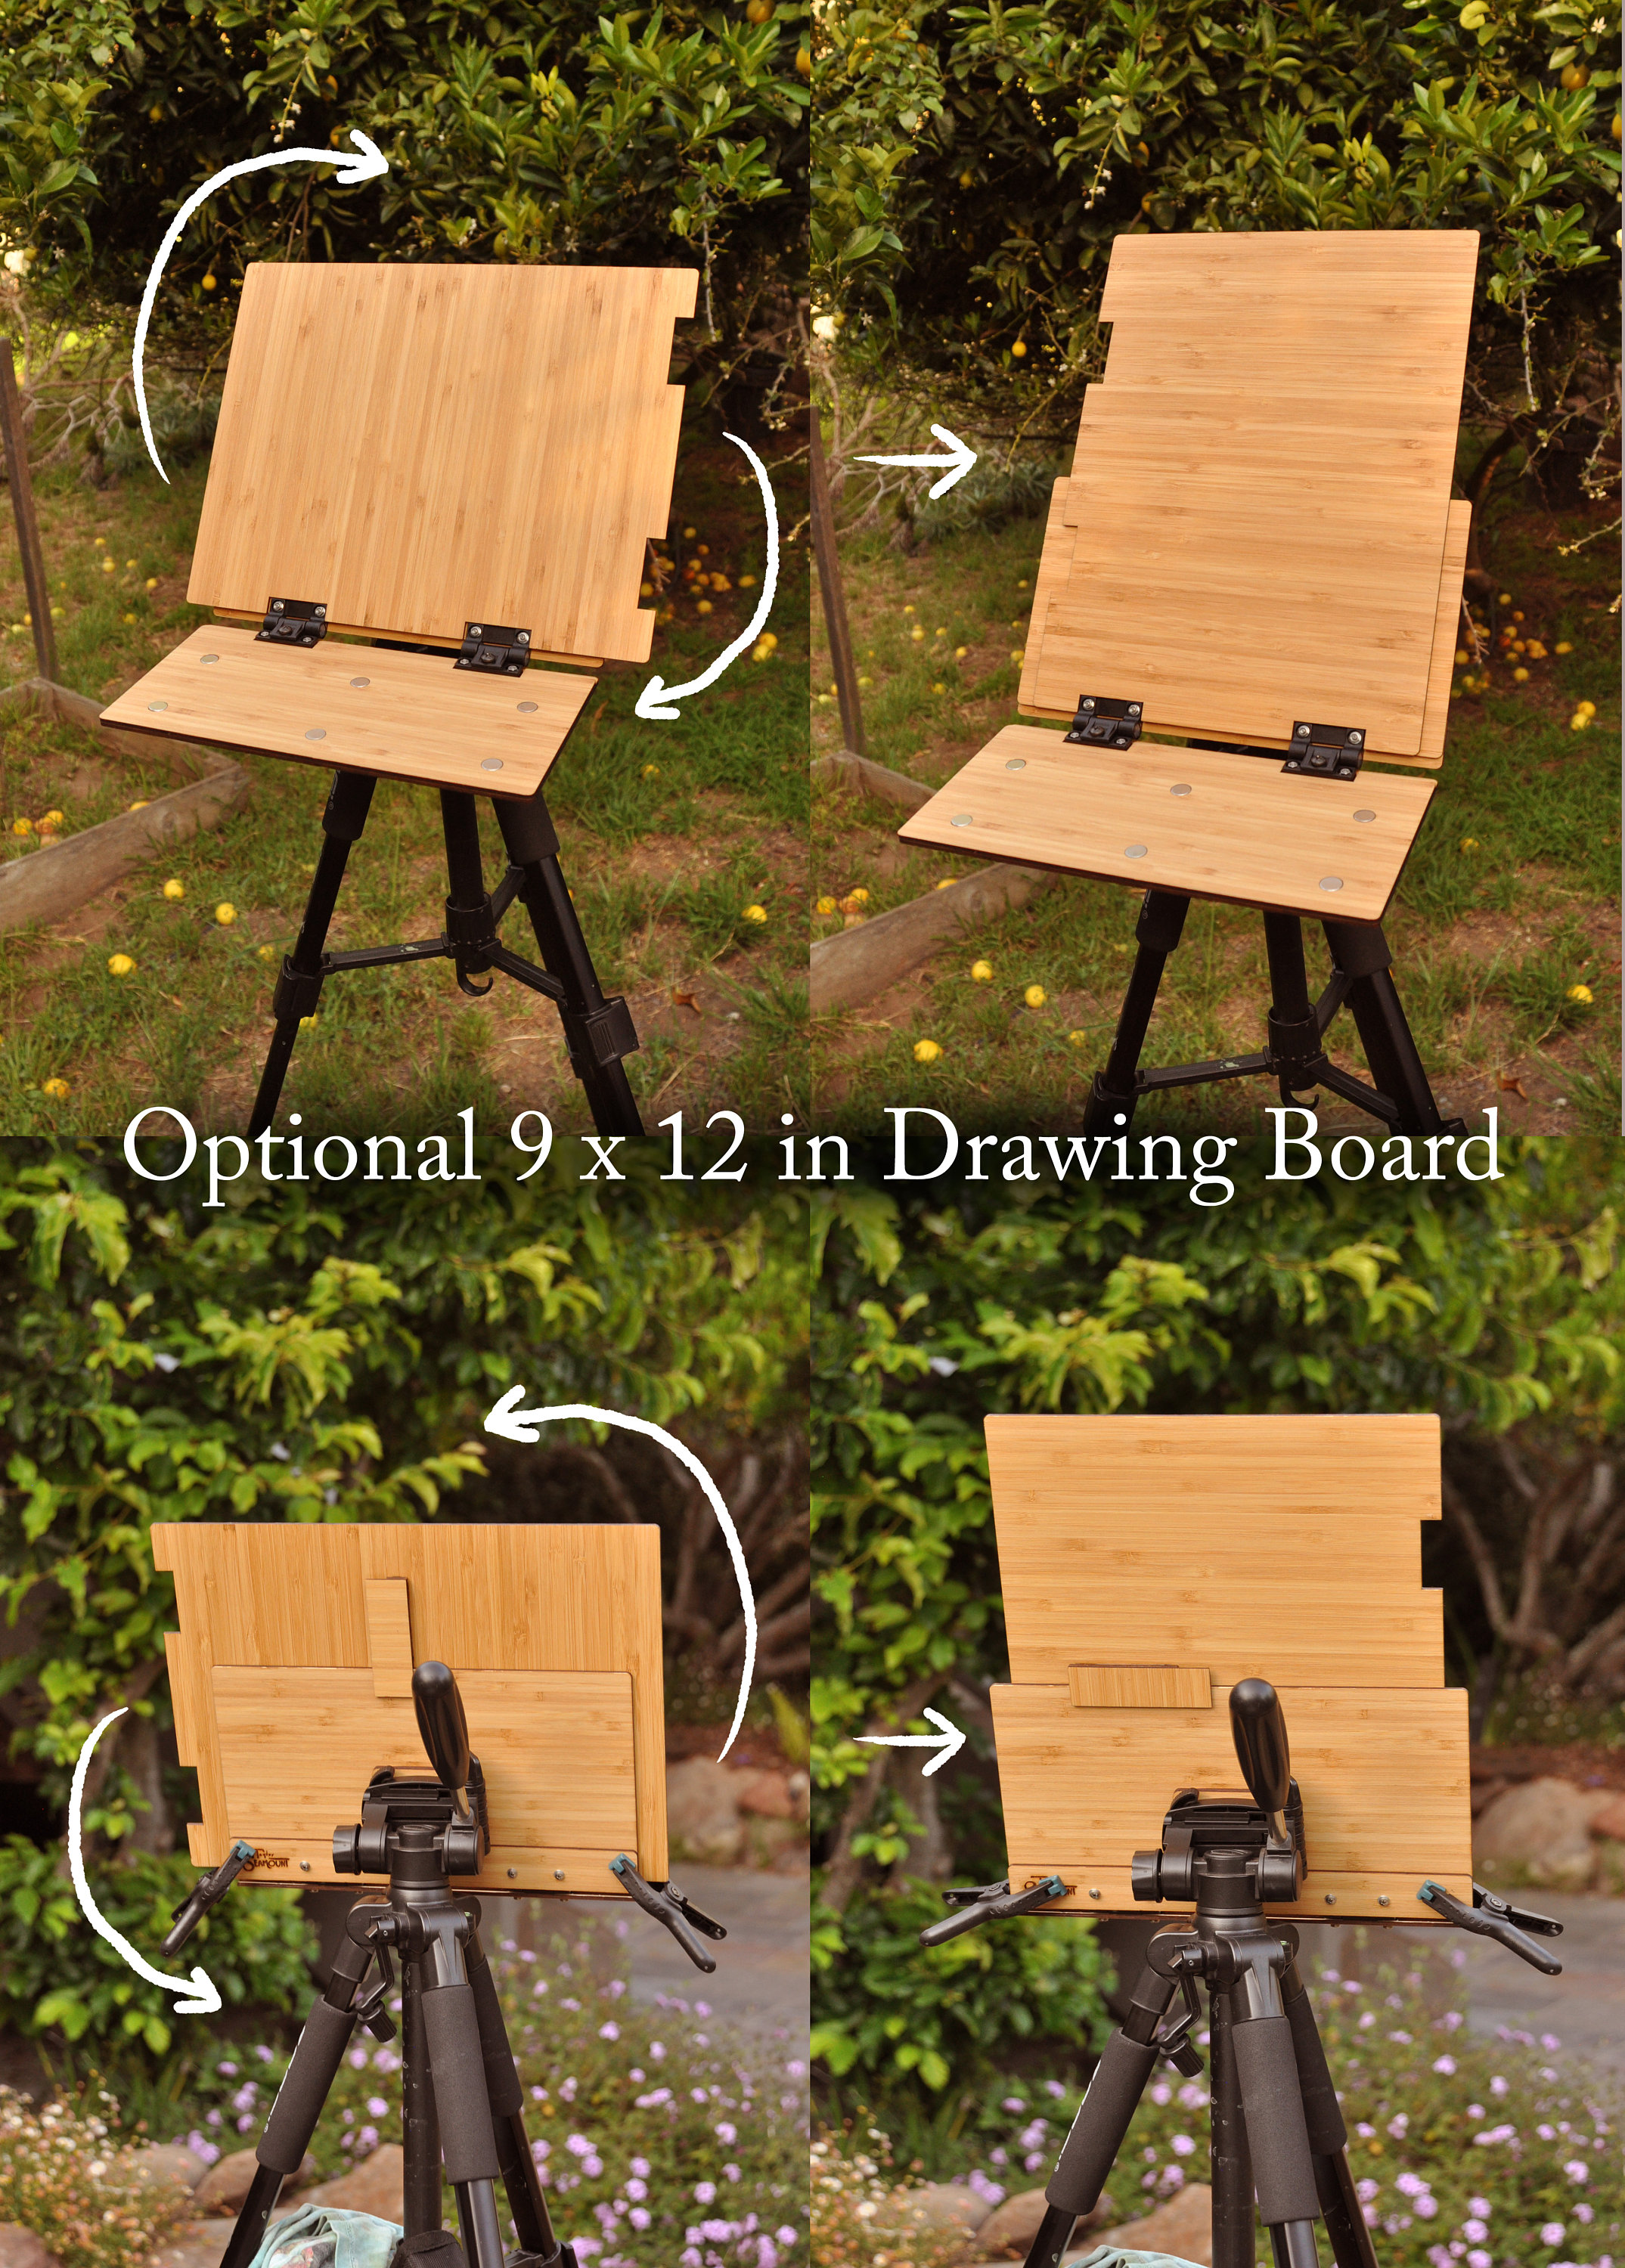 The Gurney Sketch Easel is Complete! - Michele Clamp Art